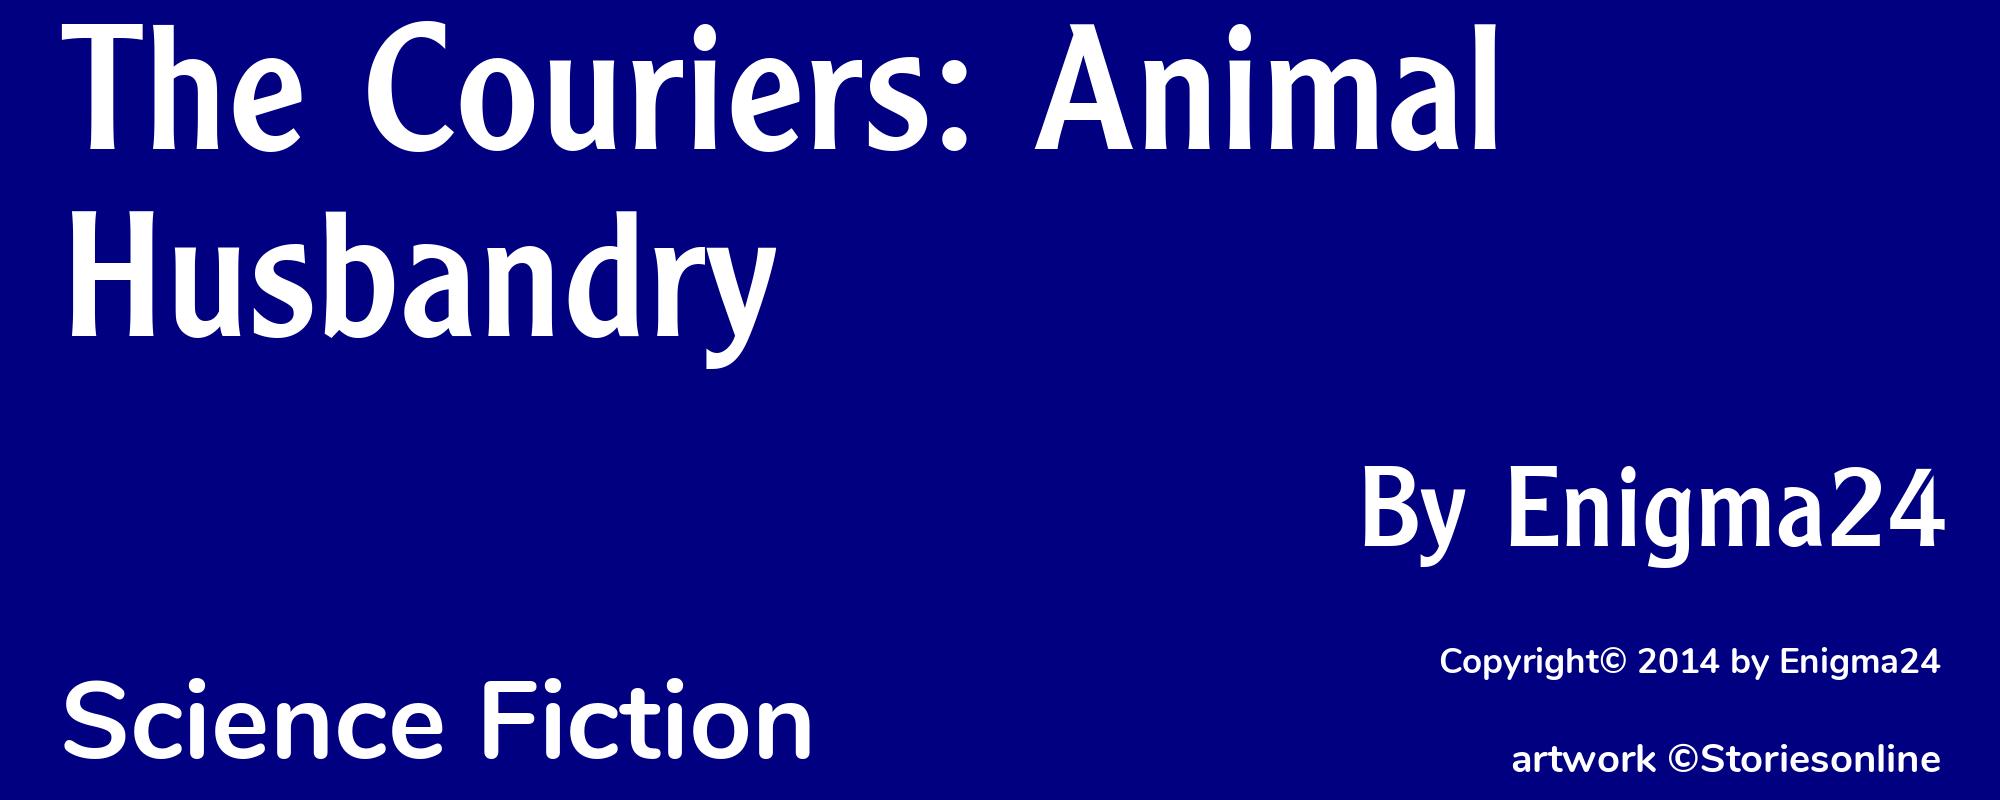 The Couriers: Animal Husbandry - Cover